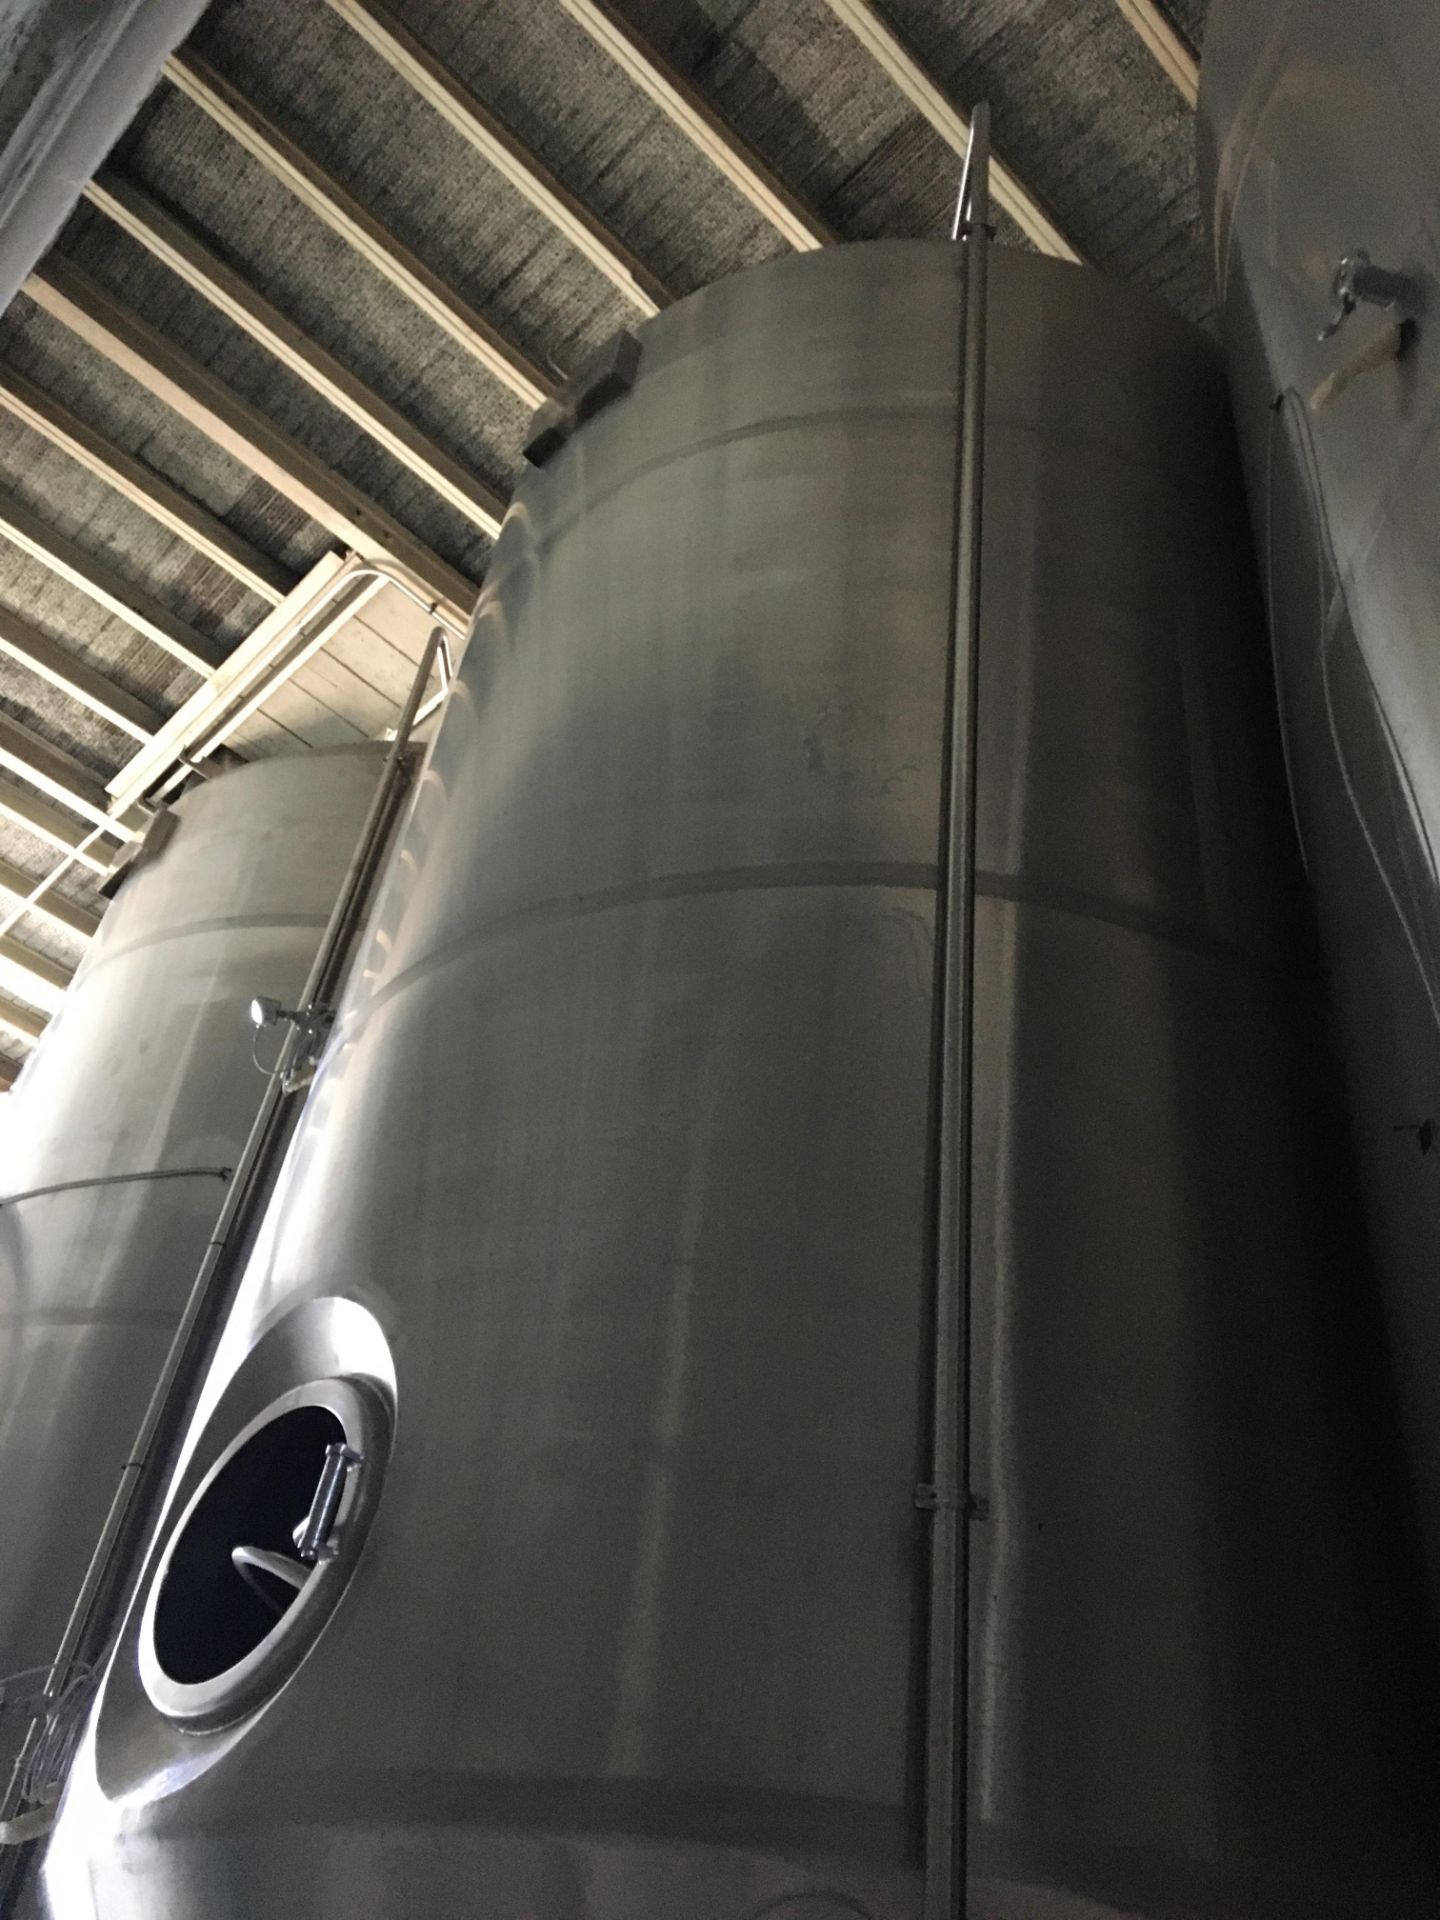 80-BBL Minnetonka Fermentation Tank, Model 80-BBL, Year 2017, Stainless Steel; Vessel store wort and - Image 3 of 8